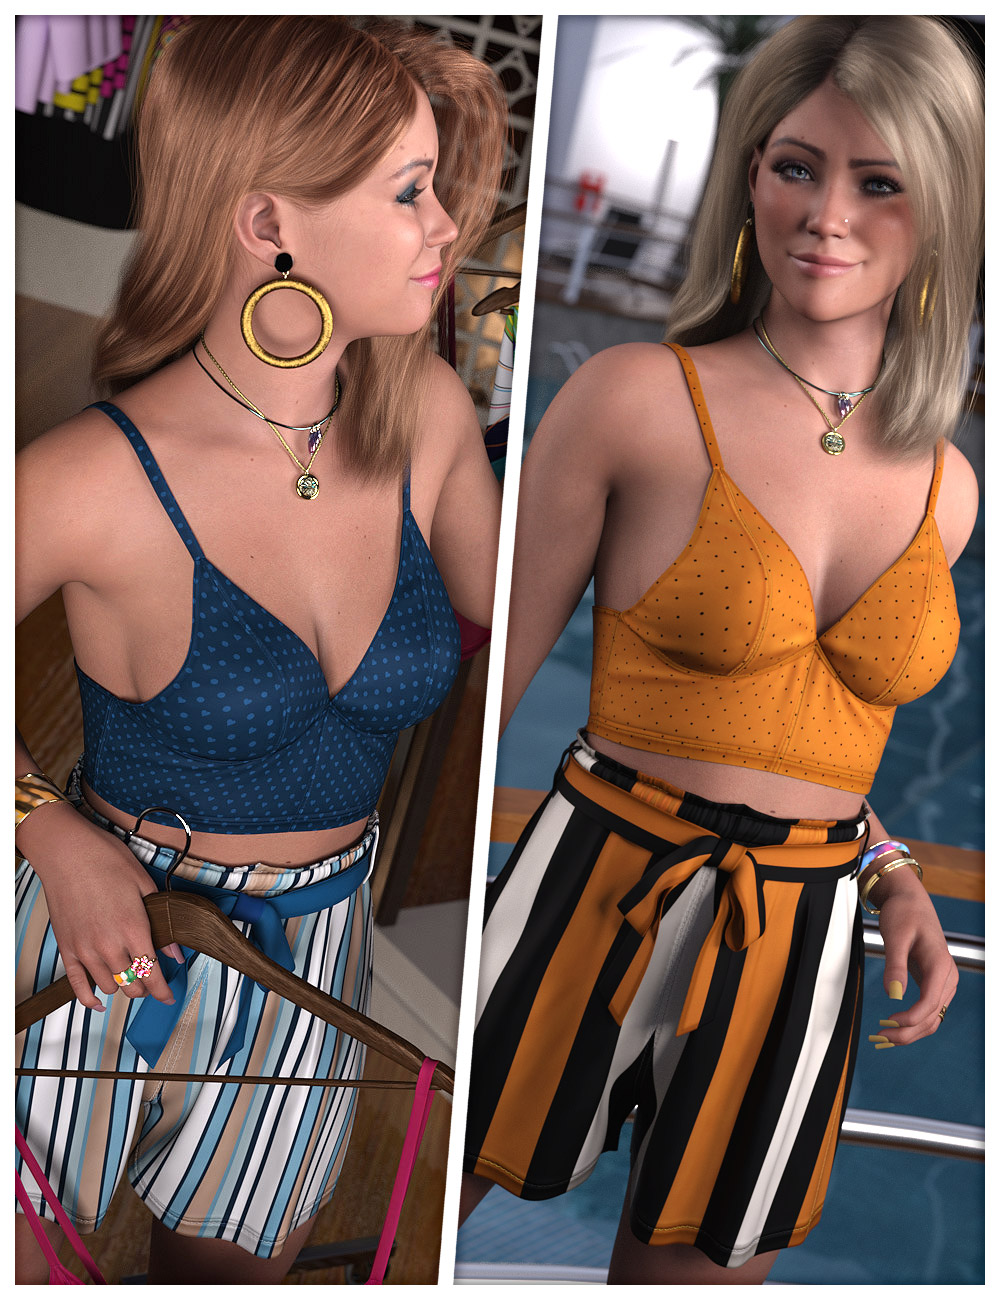 Relaxed Textures for OOT Wide Bow Shorts and Cami Top by: ShanasSoulmate, 3D Models by Daz 3D